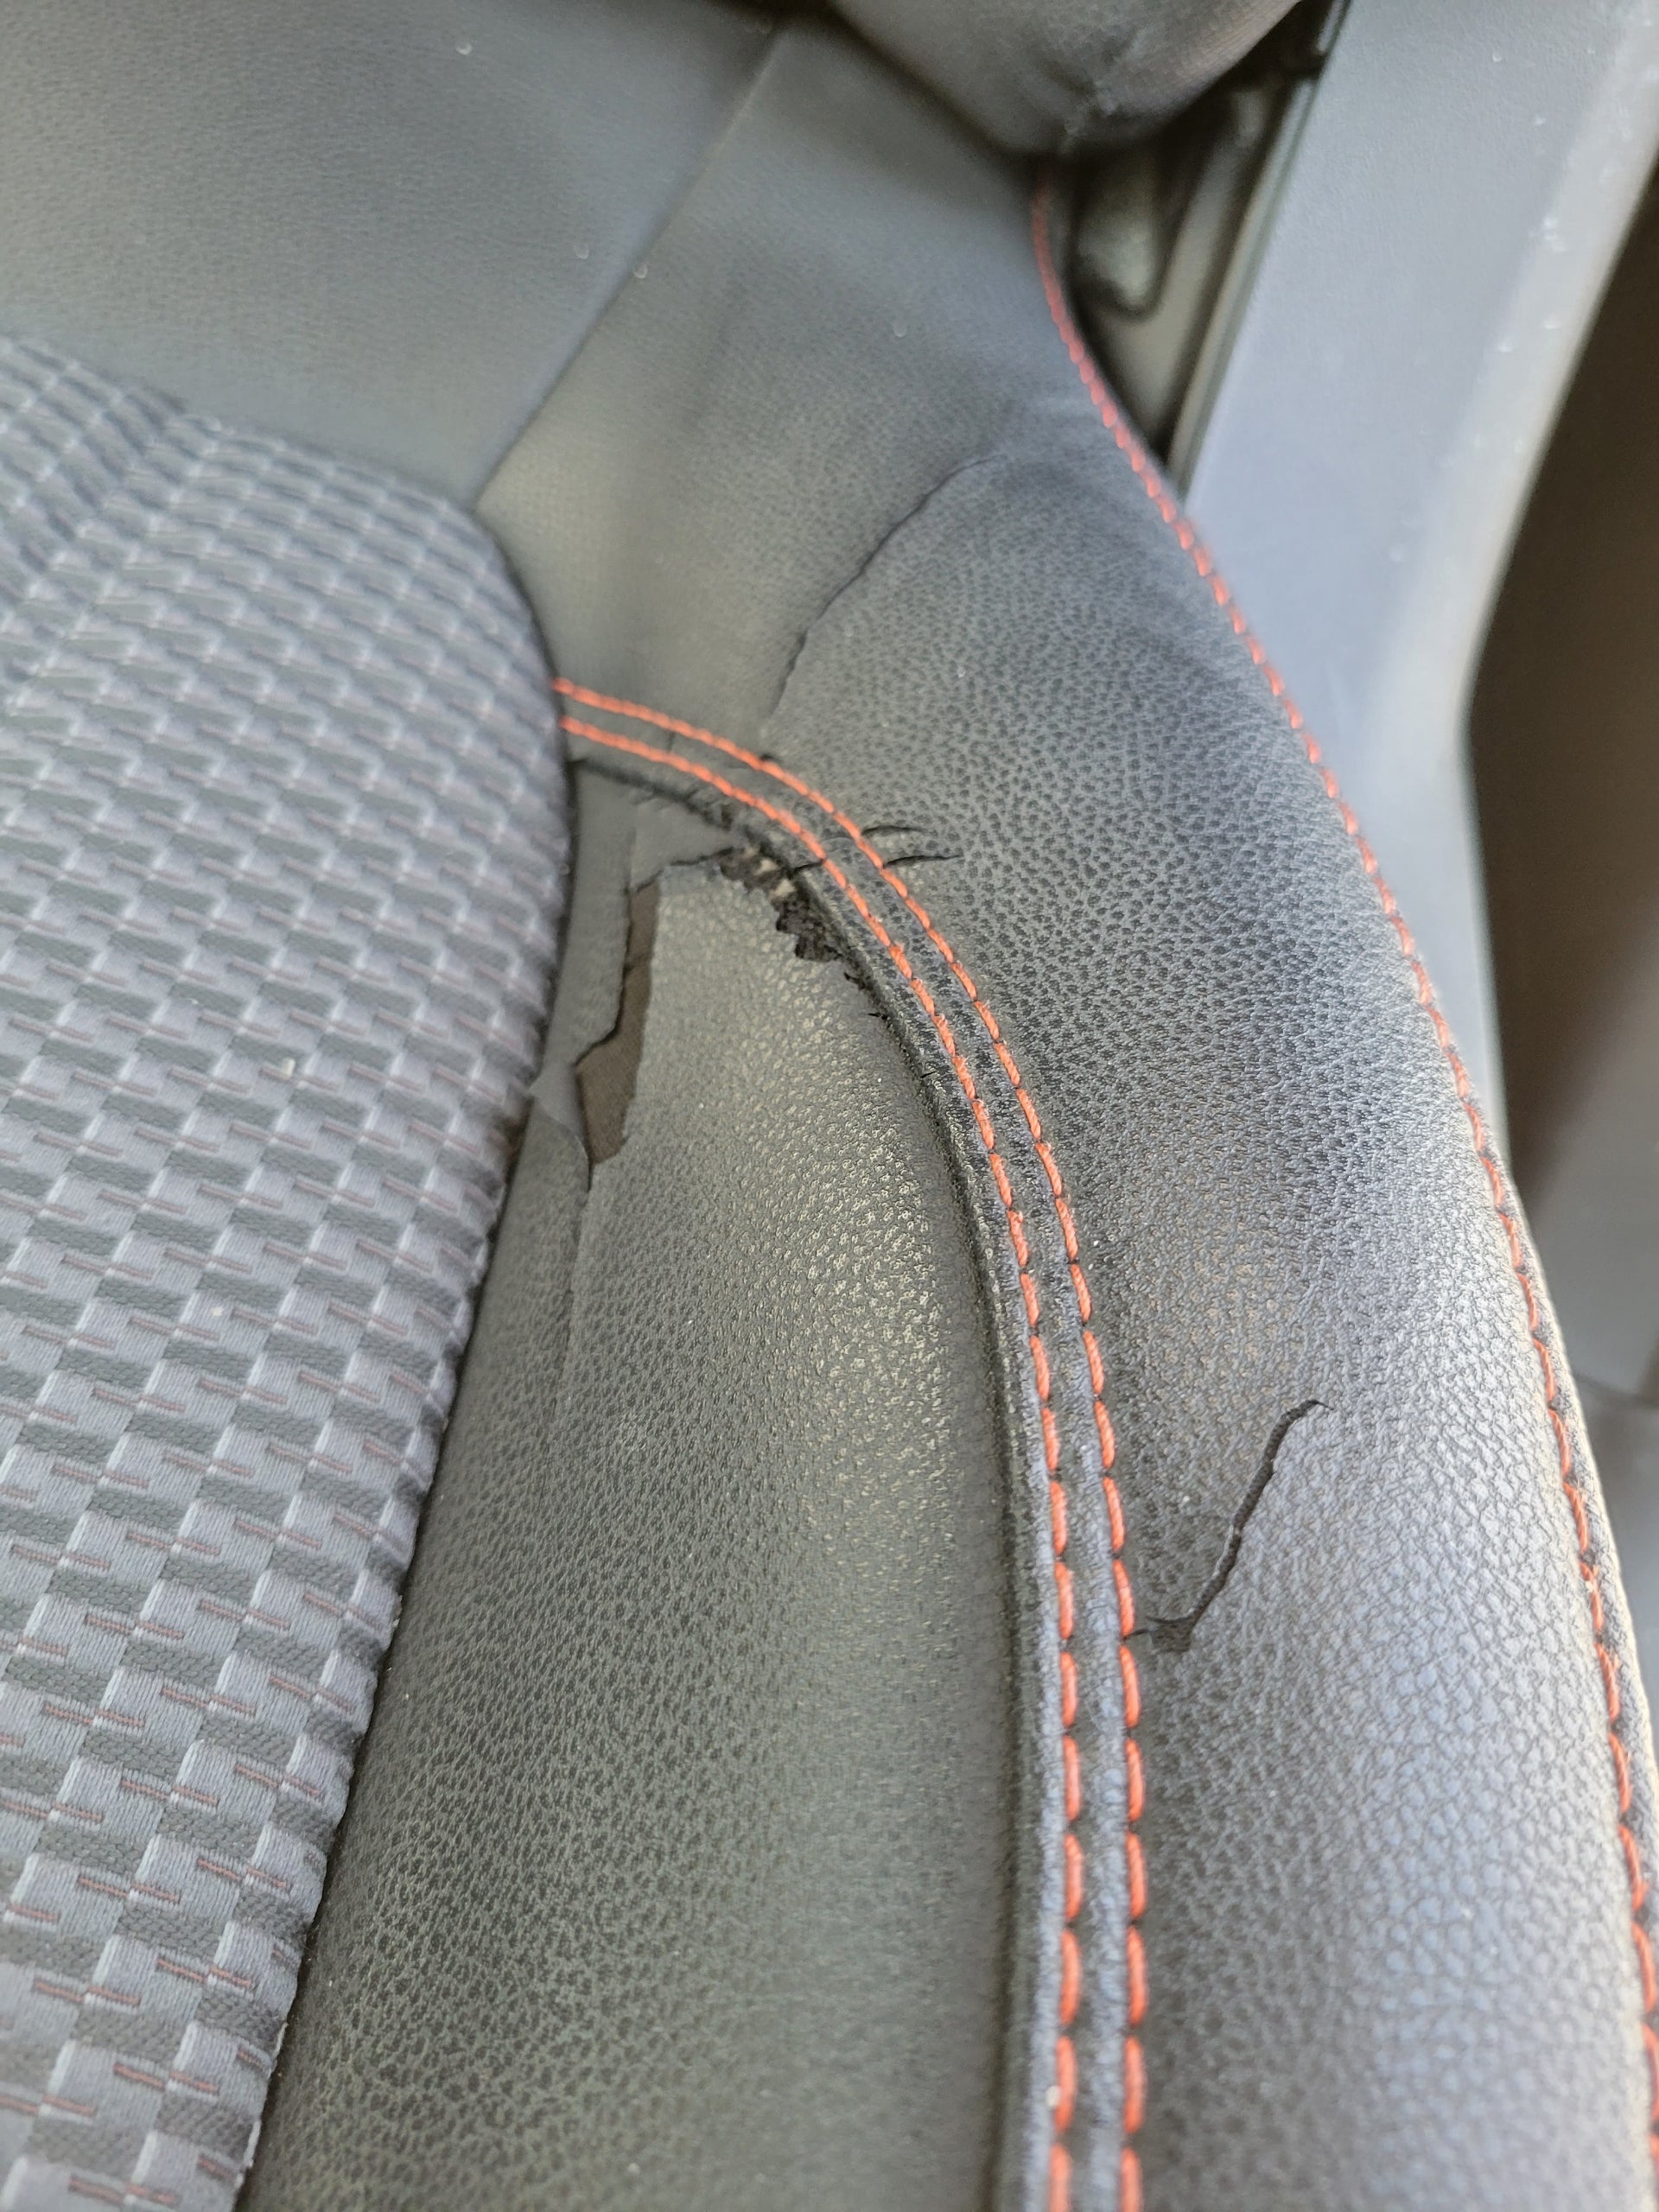 19+) - 2019 - Leather seat cracking!